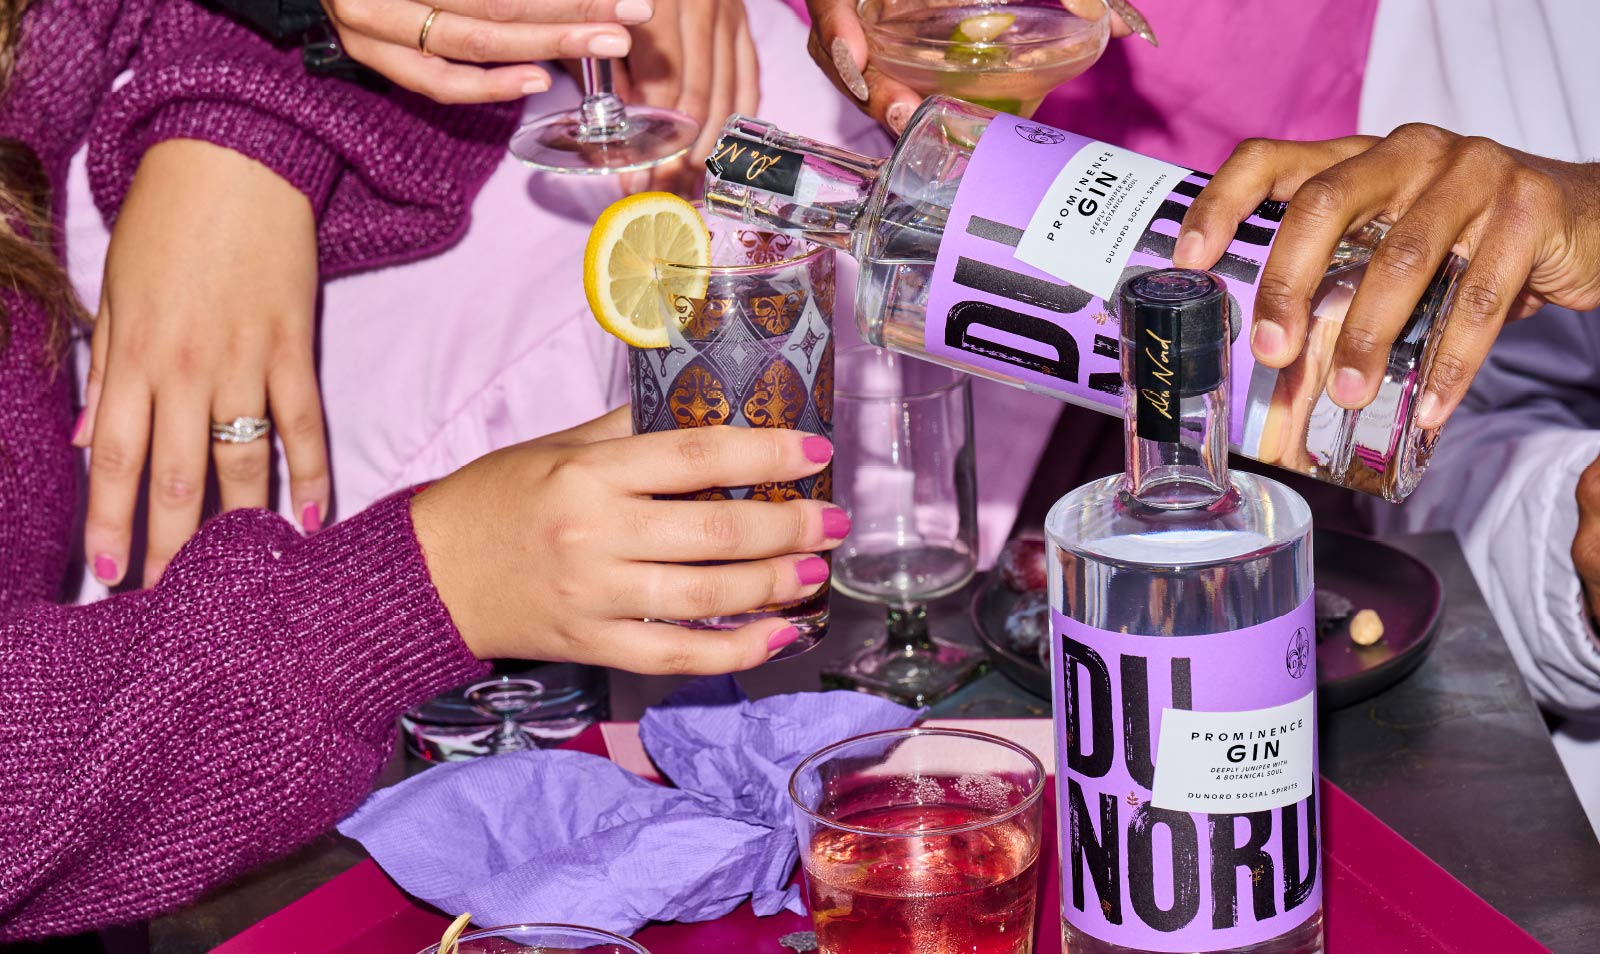 Du Nord Prominence Gin